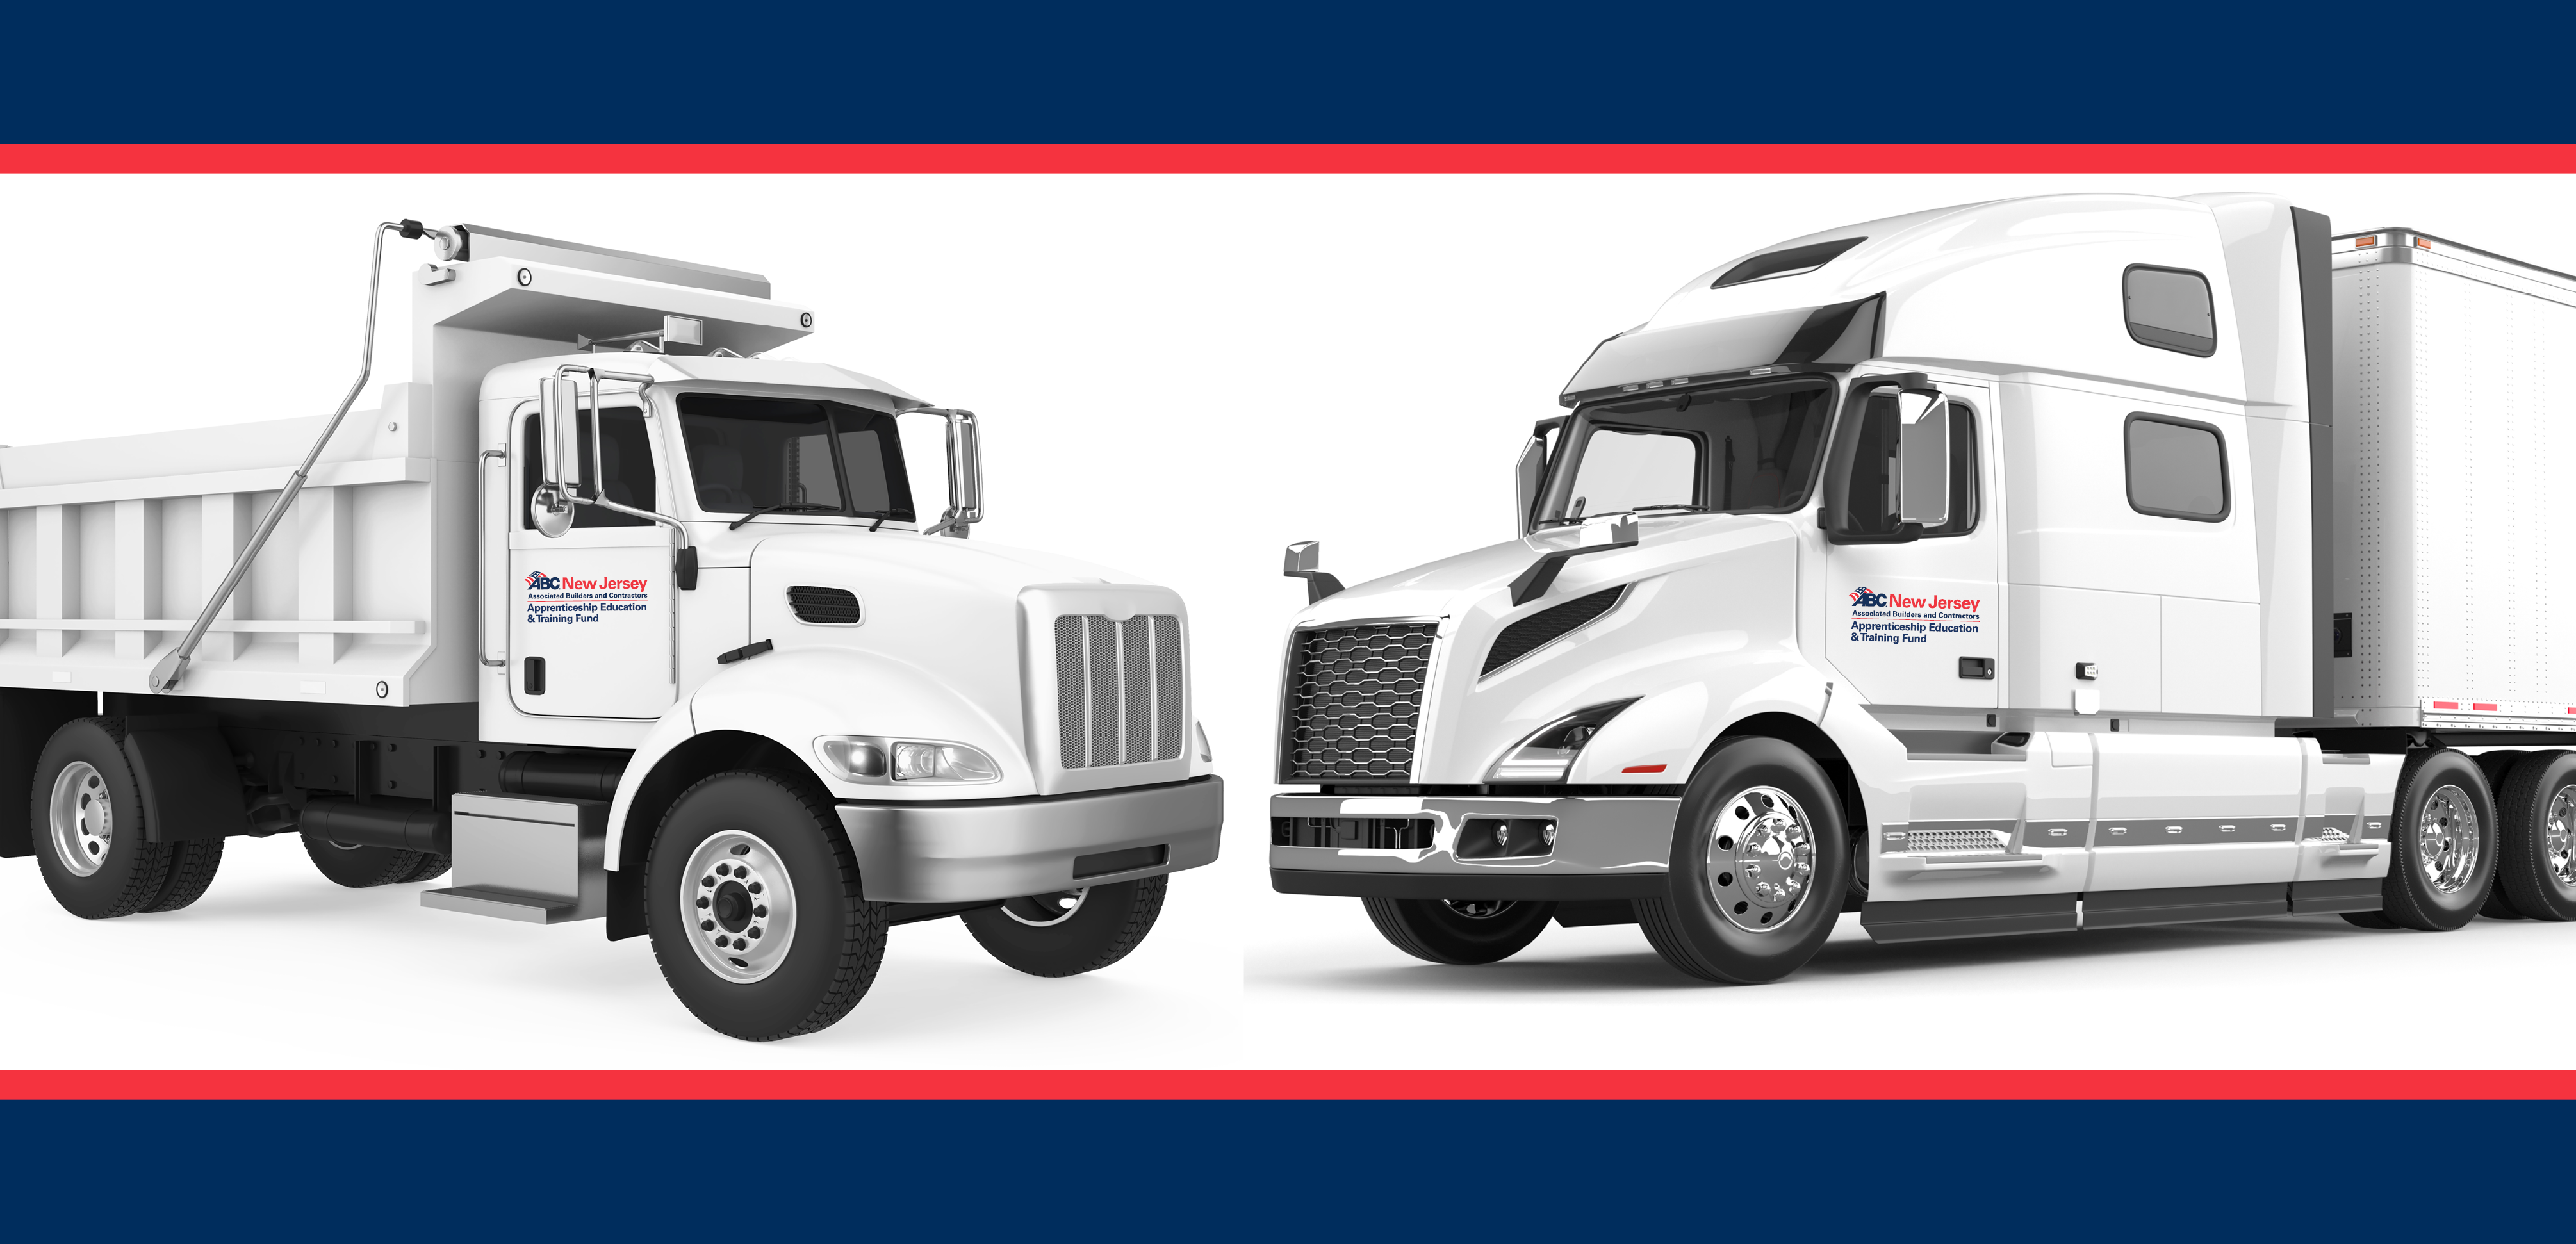 Apprentice Opportunities Grow: ABC-NJ AETF Adds Truck Driver-Heavy